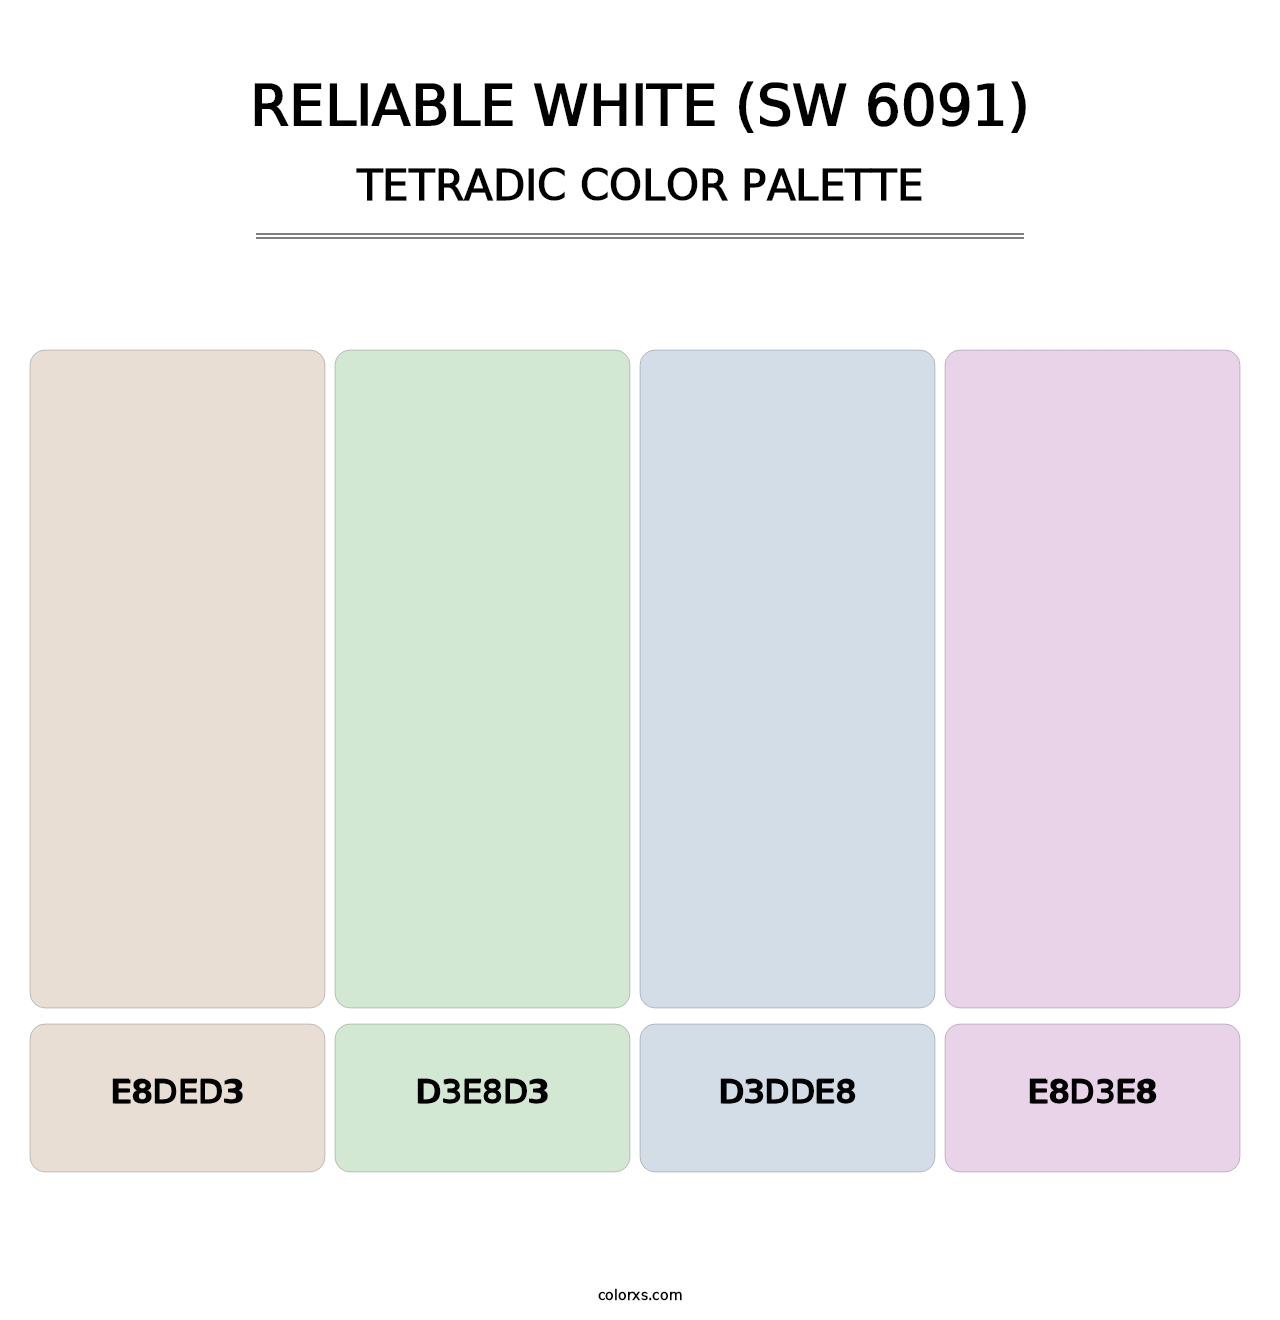 Reliable White (SW 6091) - Tetradic Color Palette